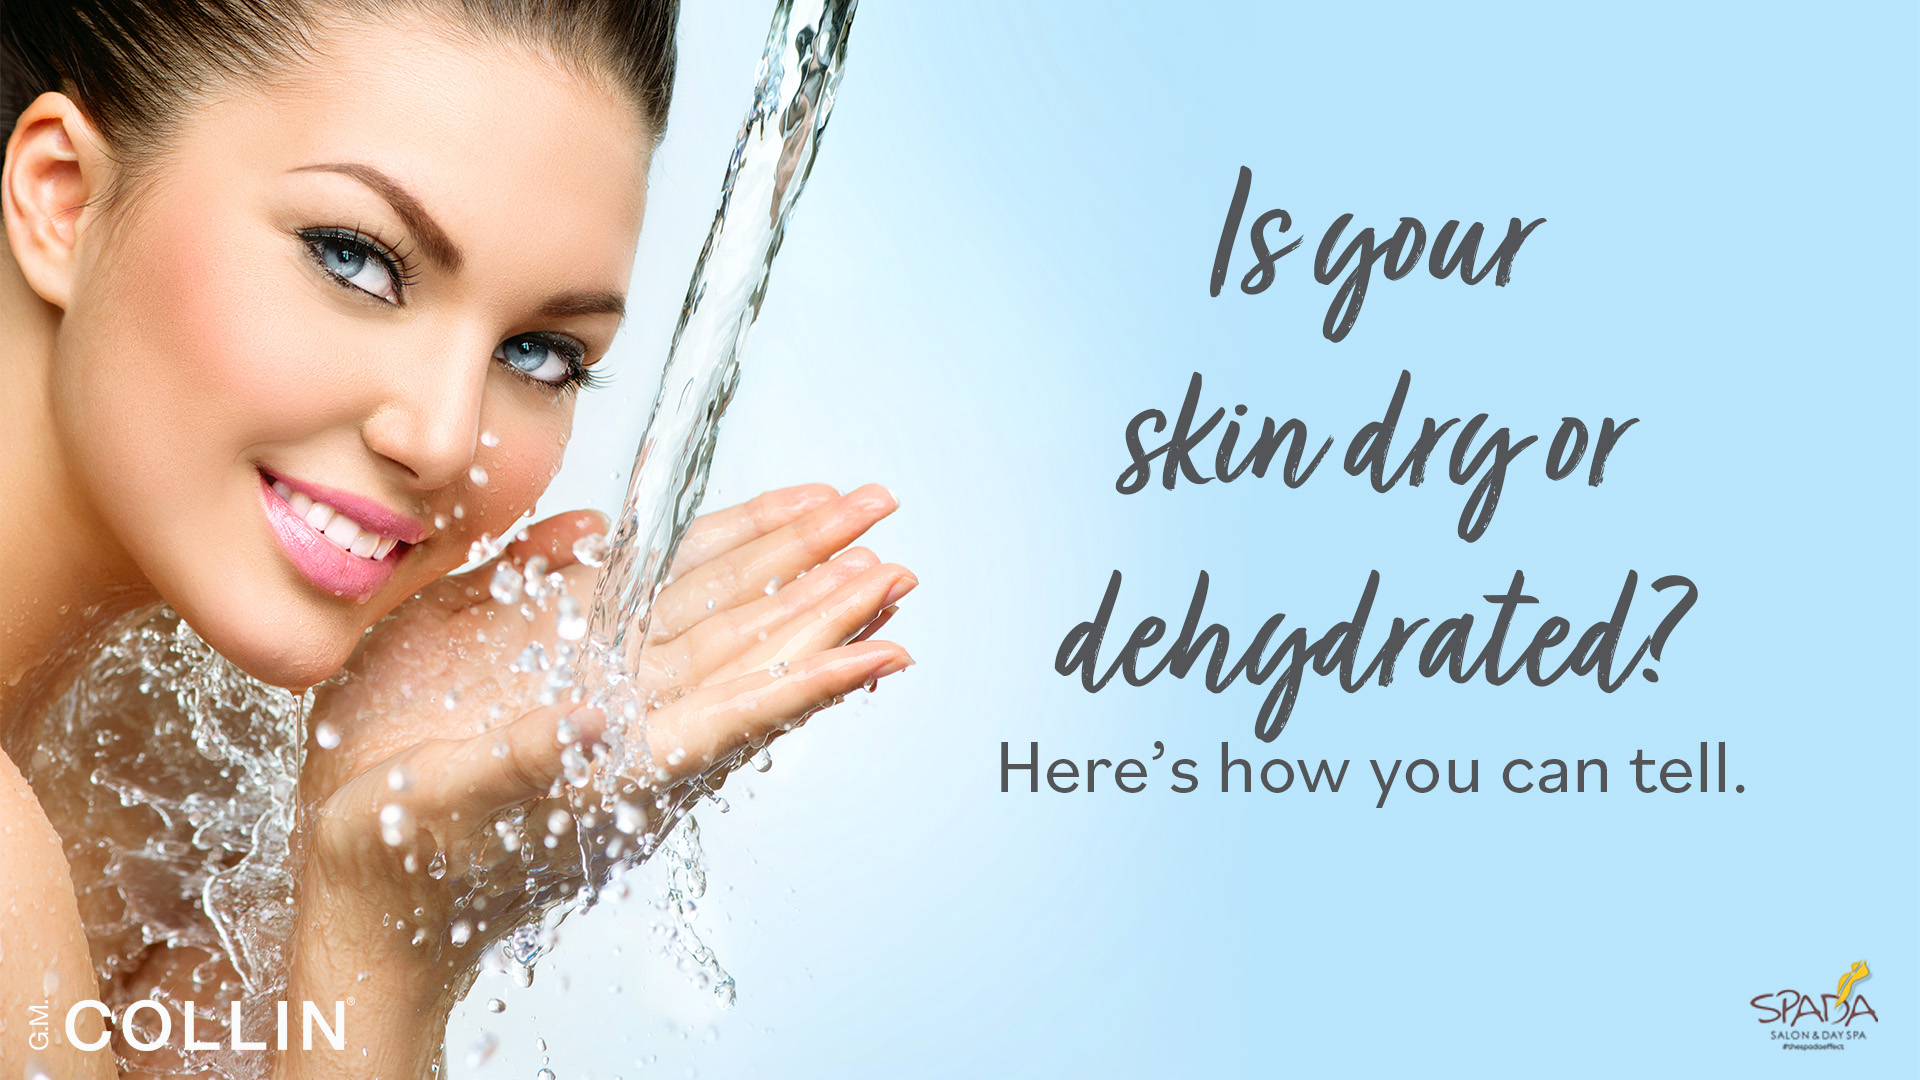 Is your skin dry or dehydrated? Here's how you can tell.